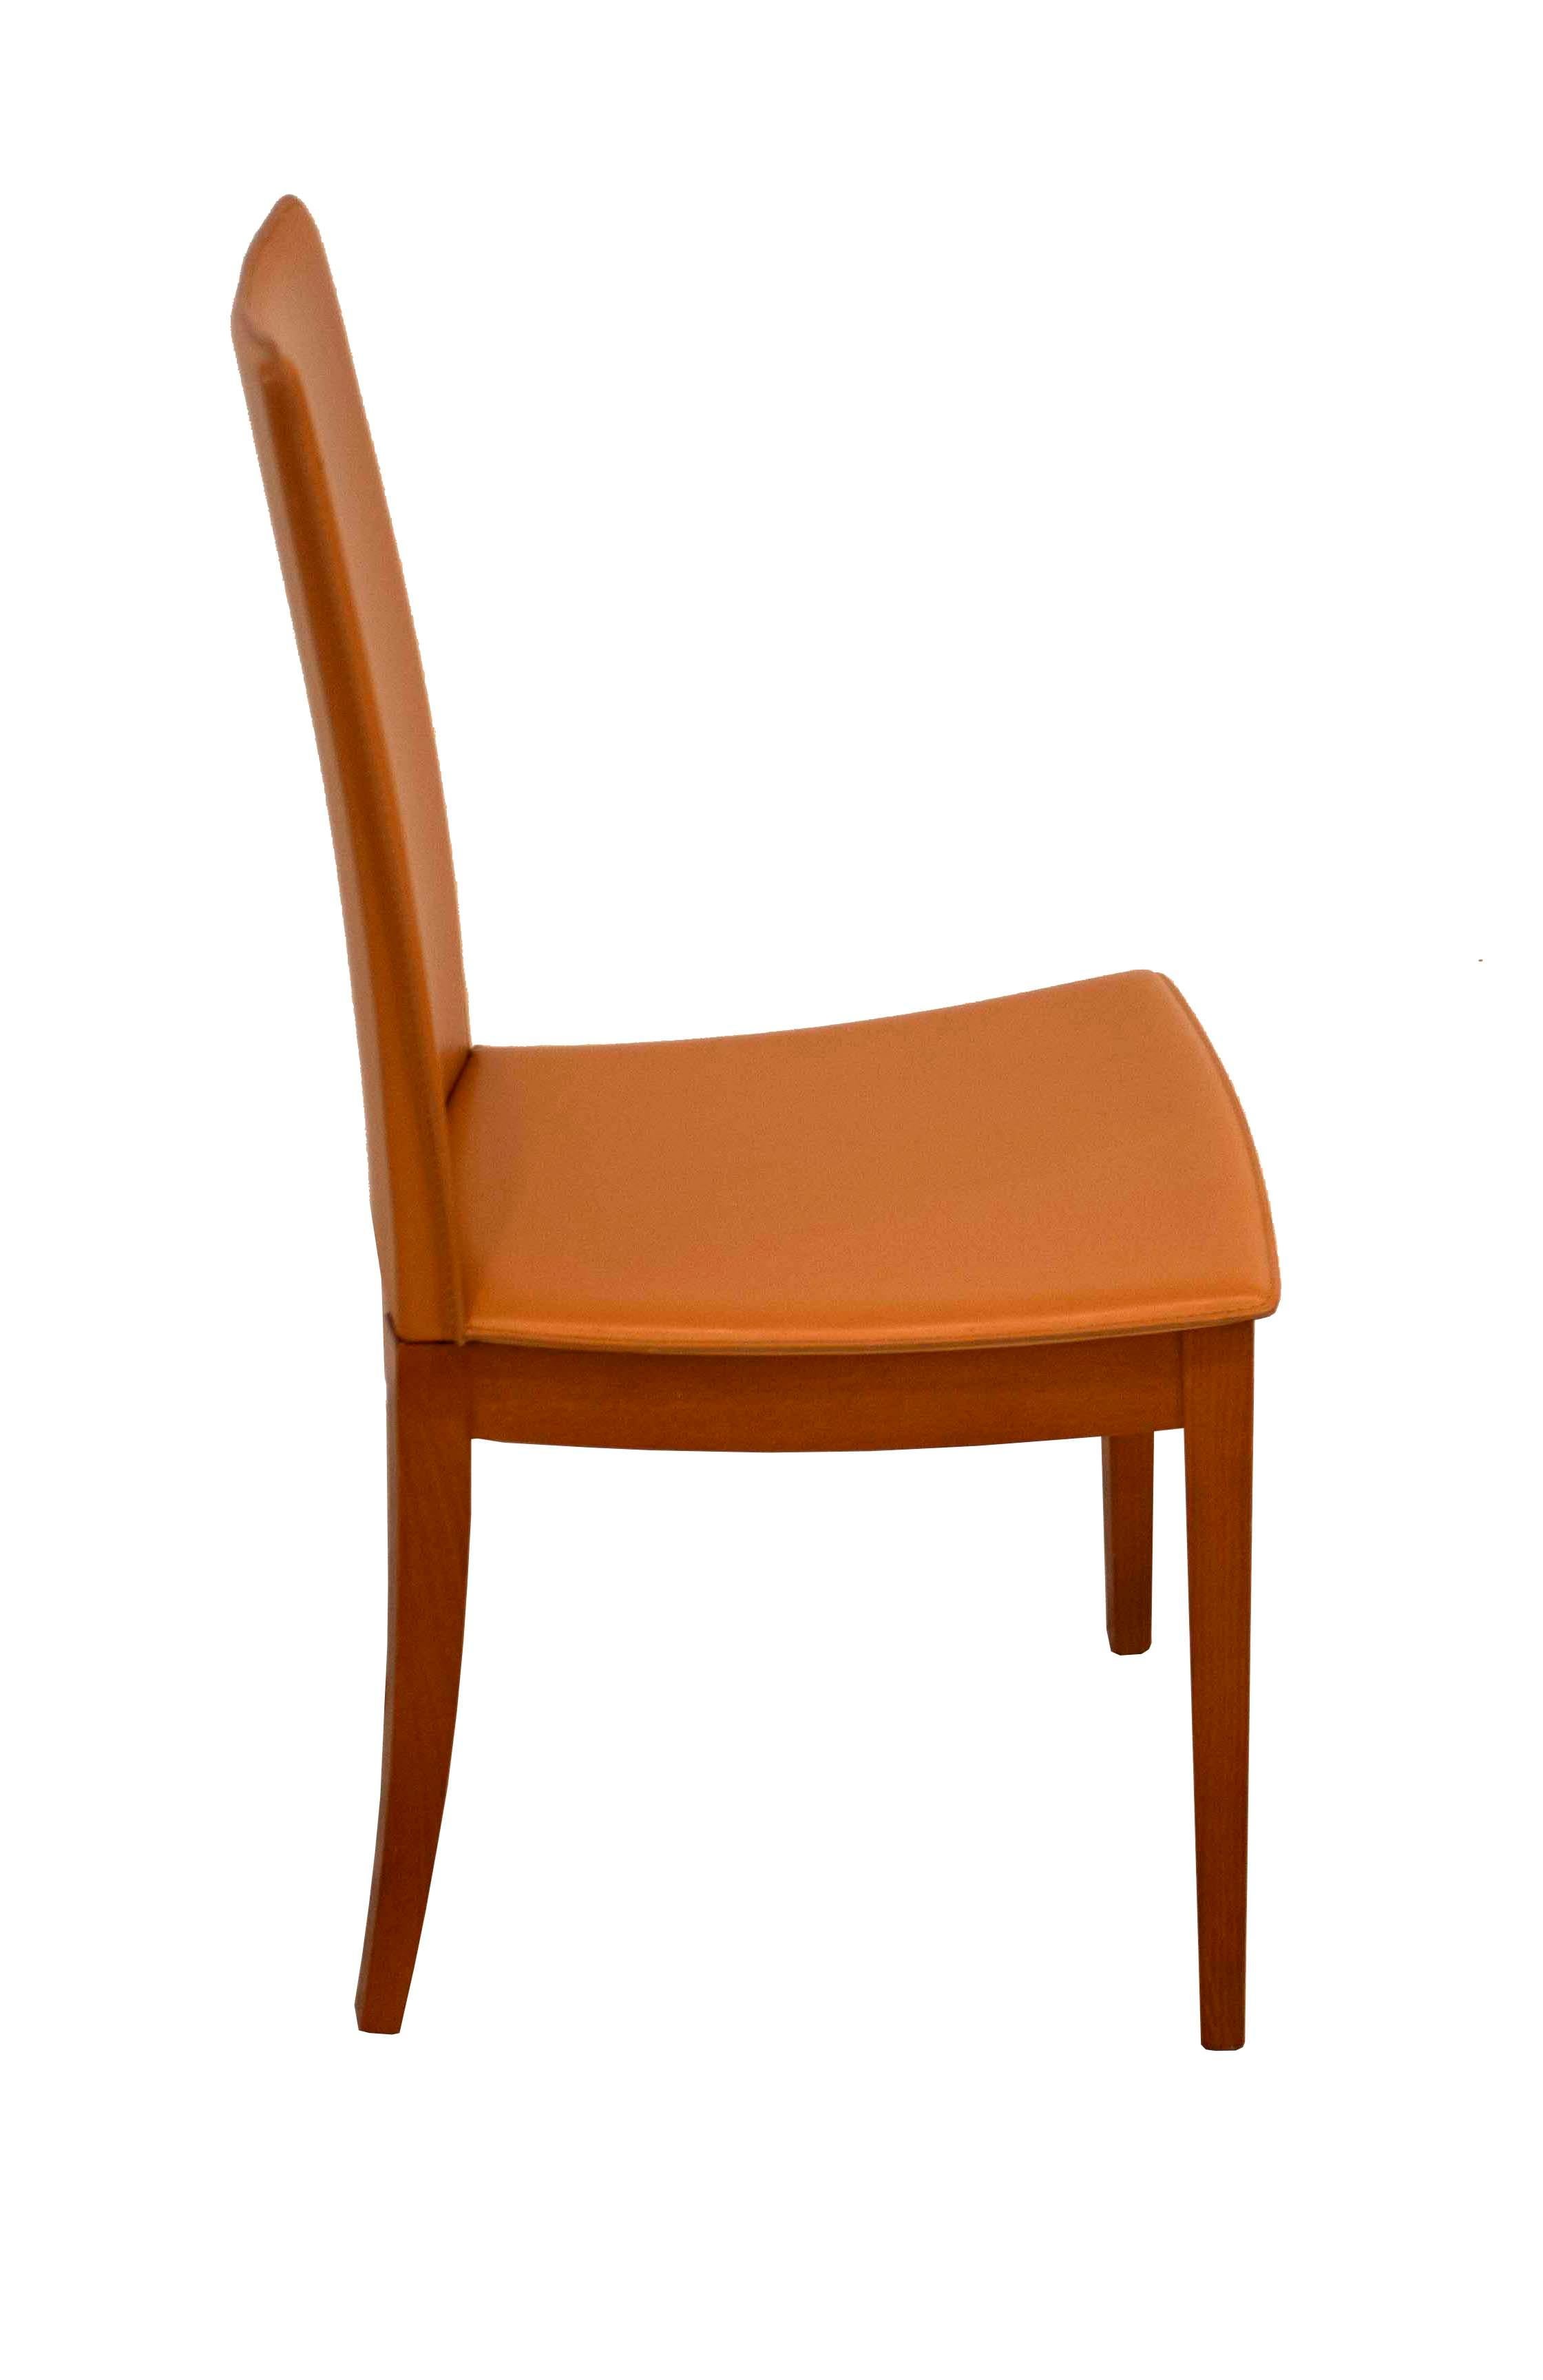 Set of 6 Calligaris Leather Italian Dining Chairs in Umber Modern Contemporary In Good Condition In Keego Harbor, MI